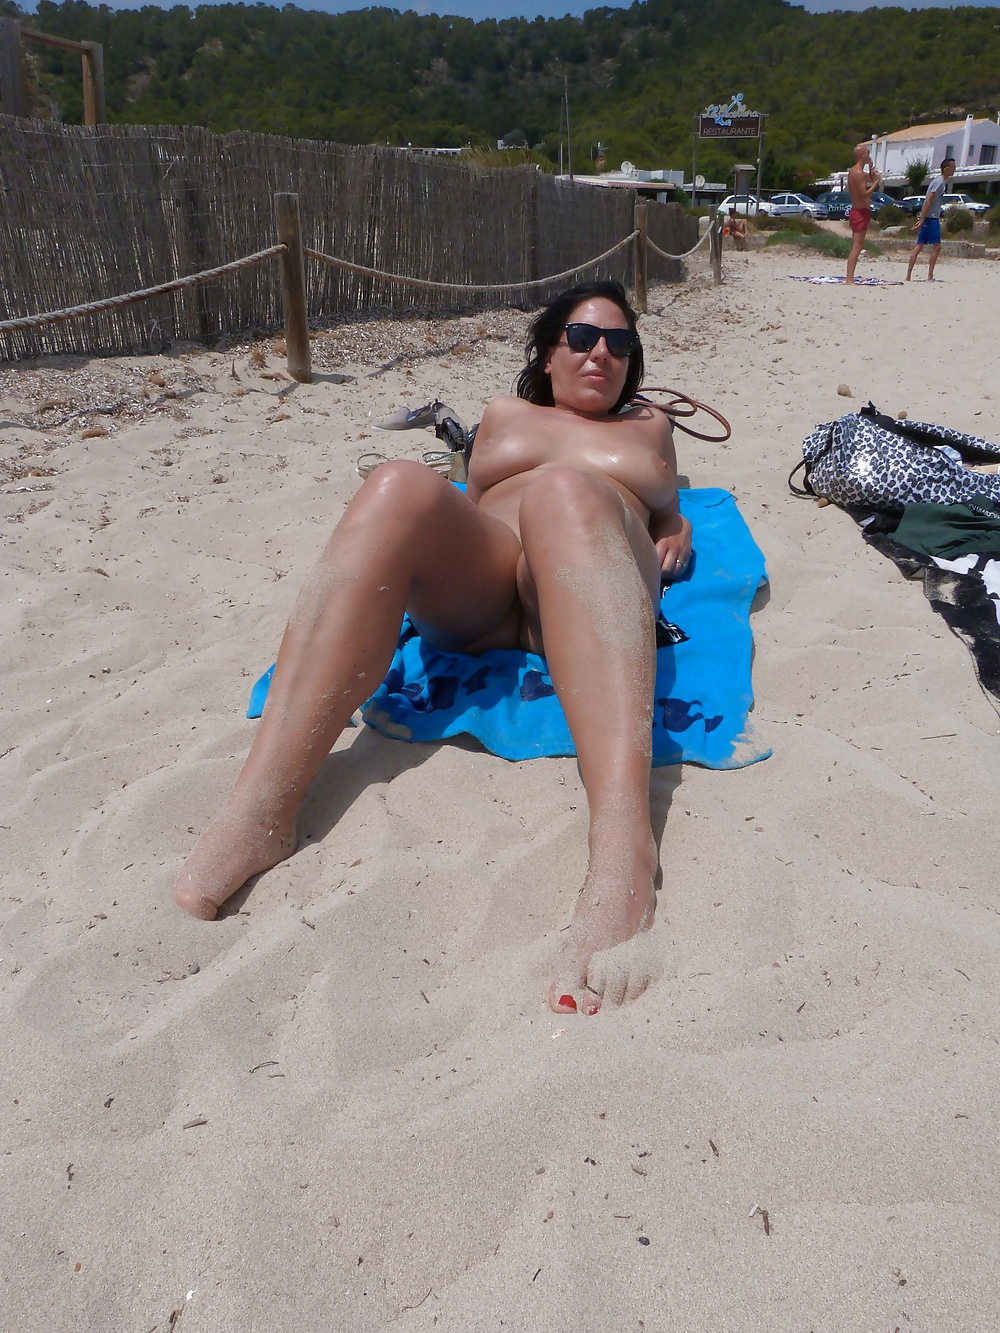 Me naked at the nudist beach #15466623